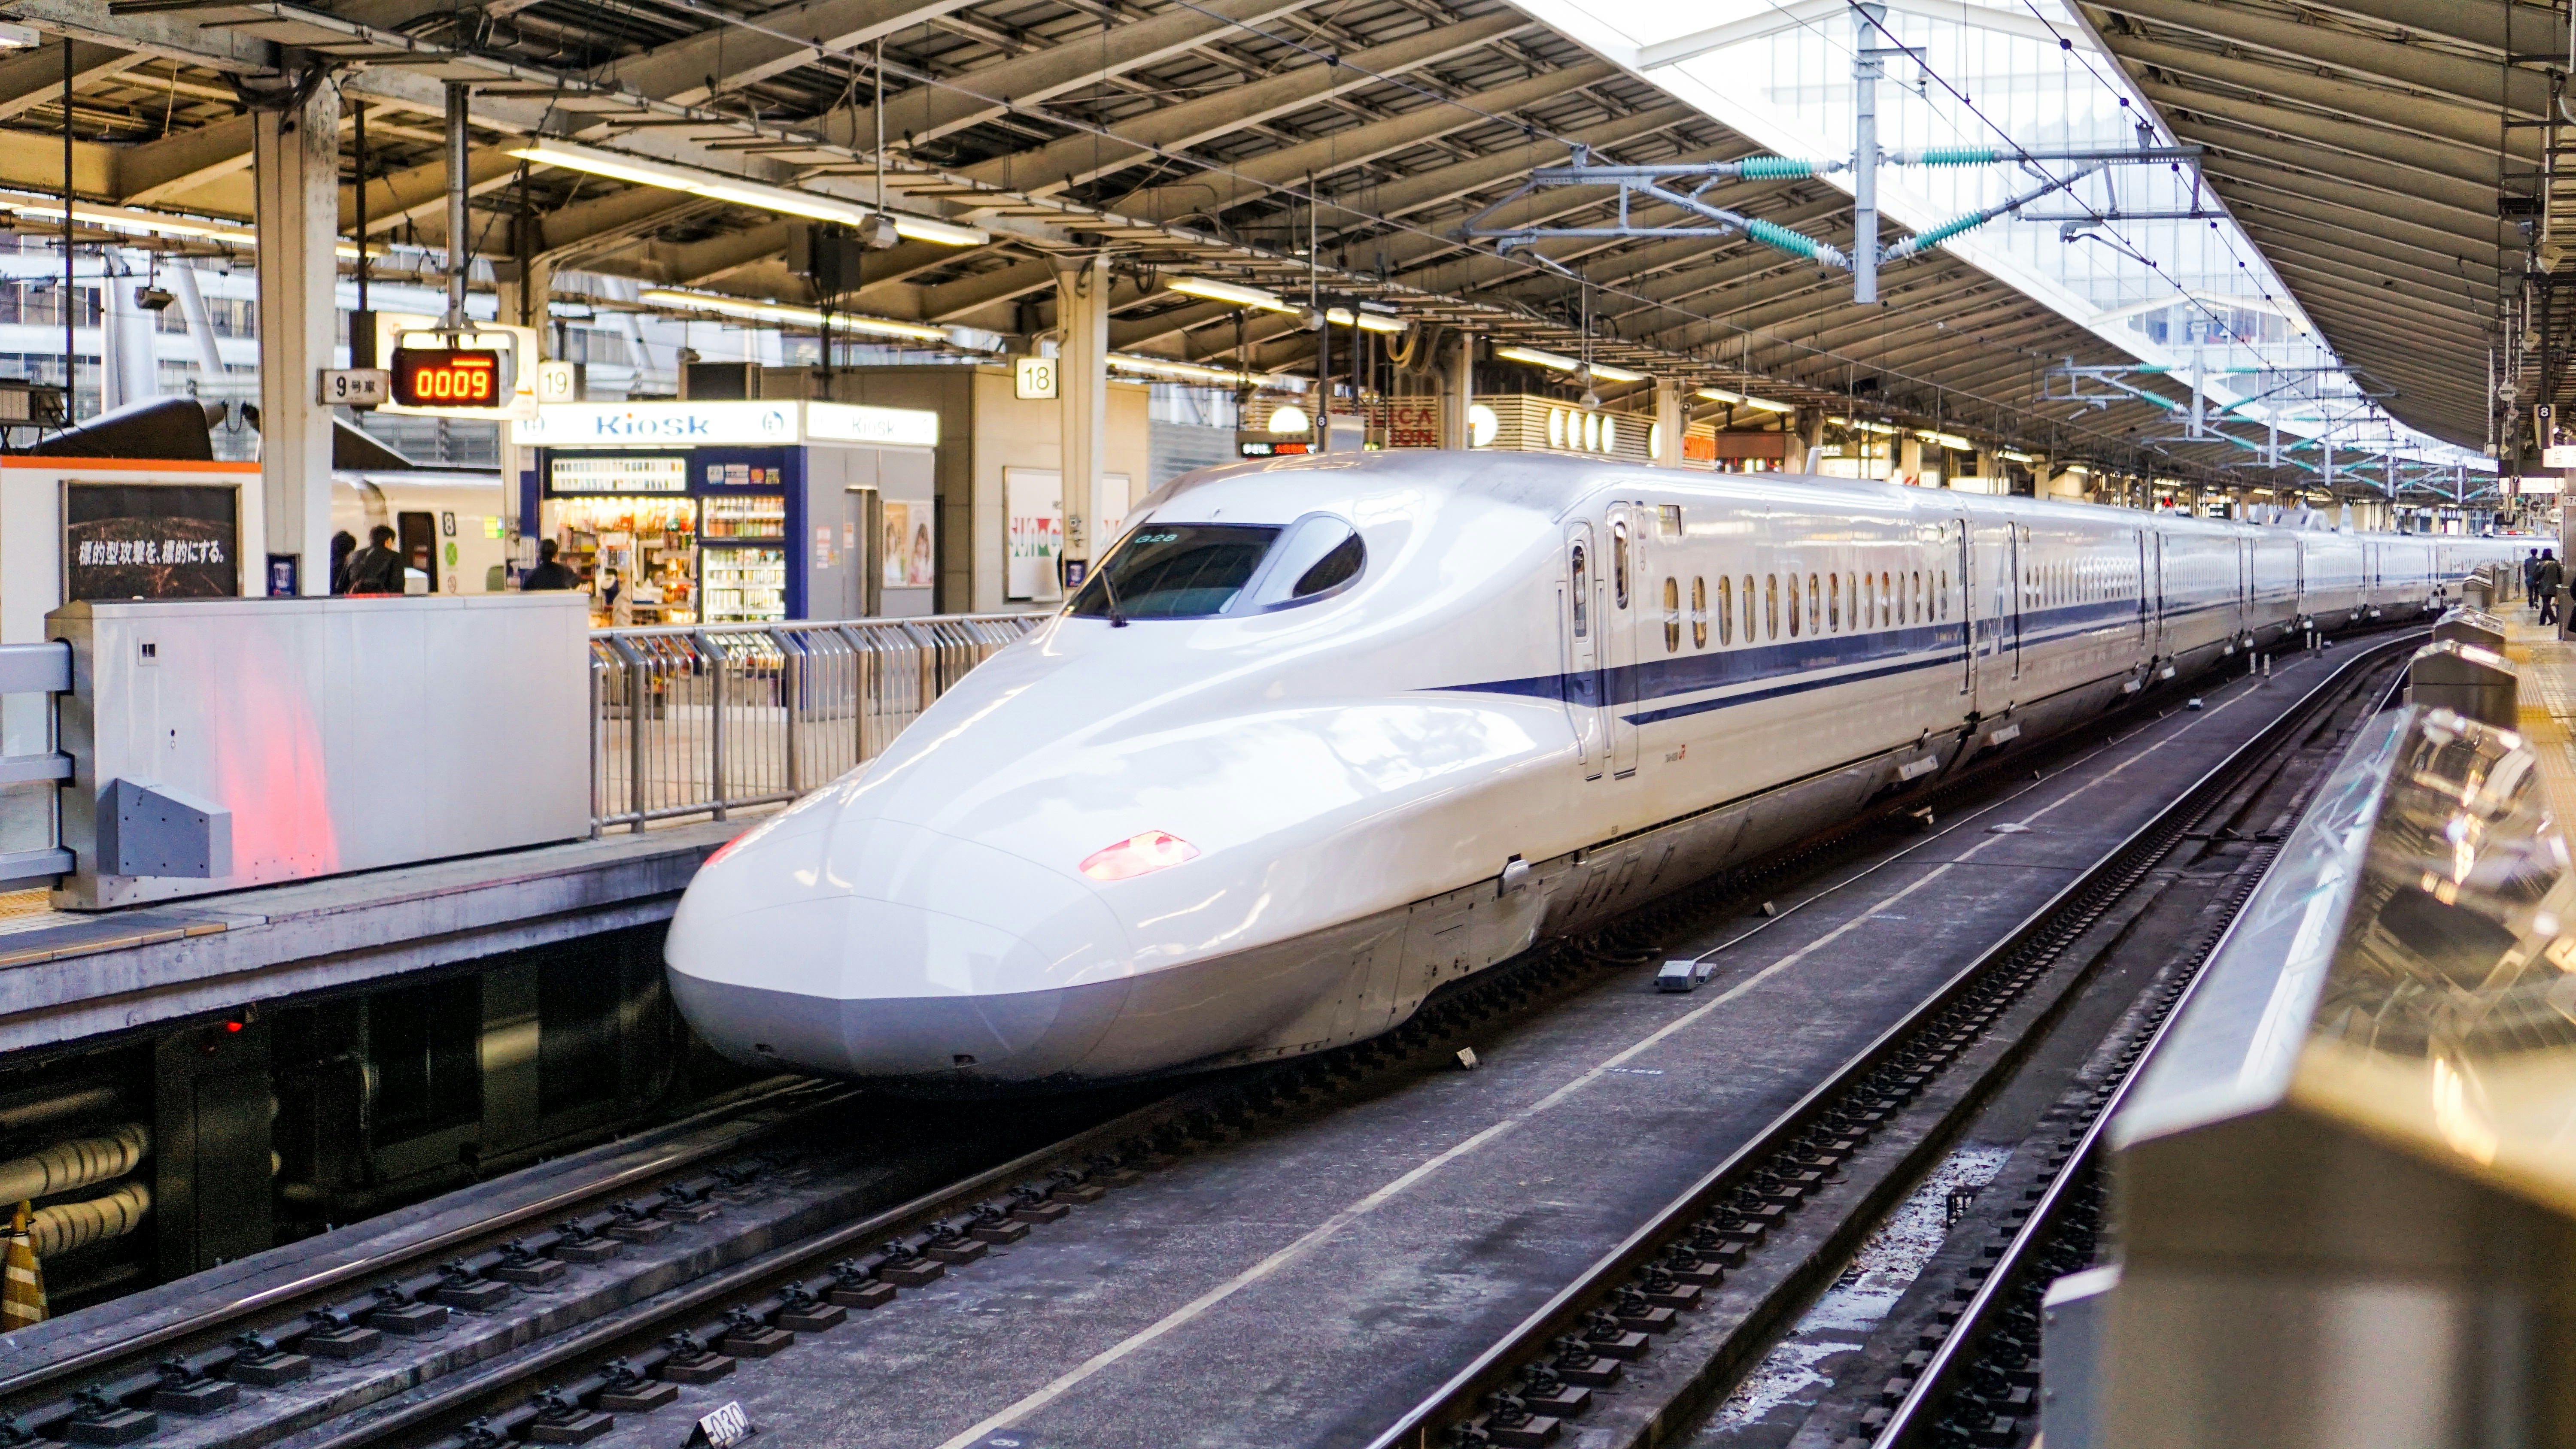 Me and my wife agreed that if this is our only trip to Japan in our lifetime, one of the thing that we should do is trying out Shinkansen from Tokyo to Kyoto. It was quite pricey but it was worth it. I managed to took a picture of it when we’re waiting for our Shinkansen to come.